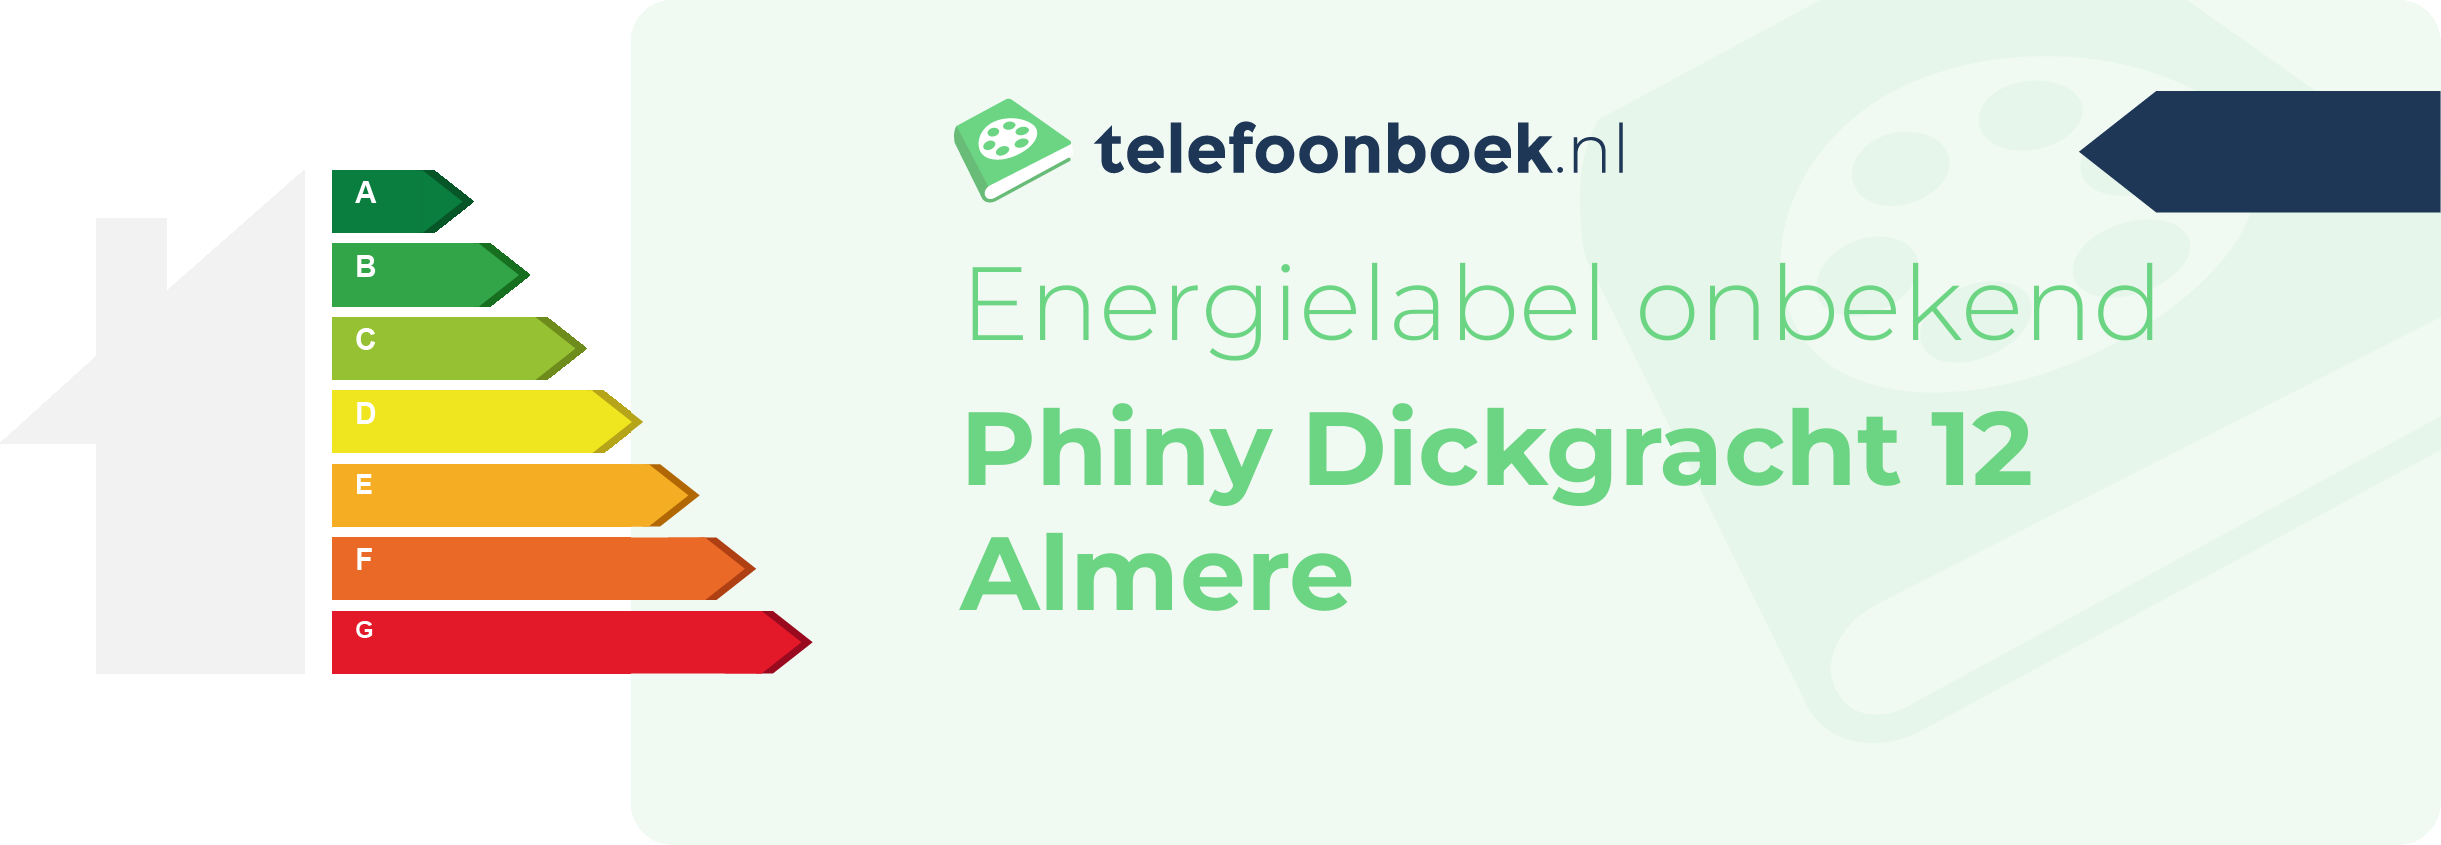 Energielabel Phiny Dickgracht 12 Almere